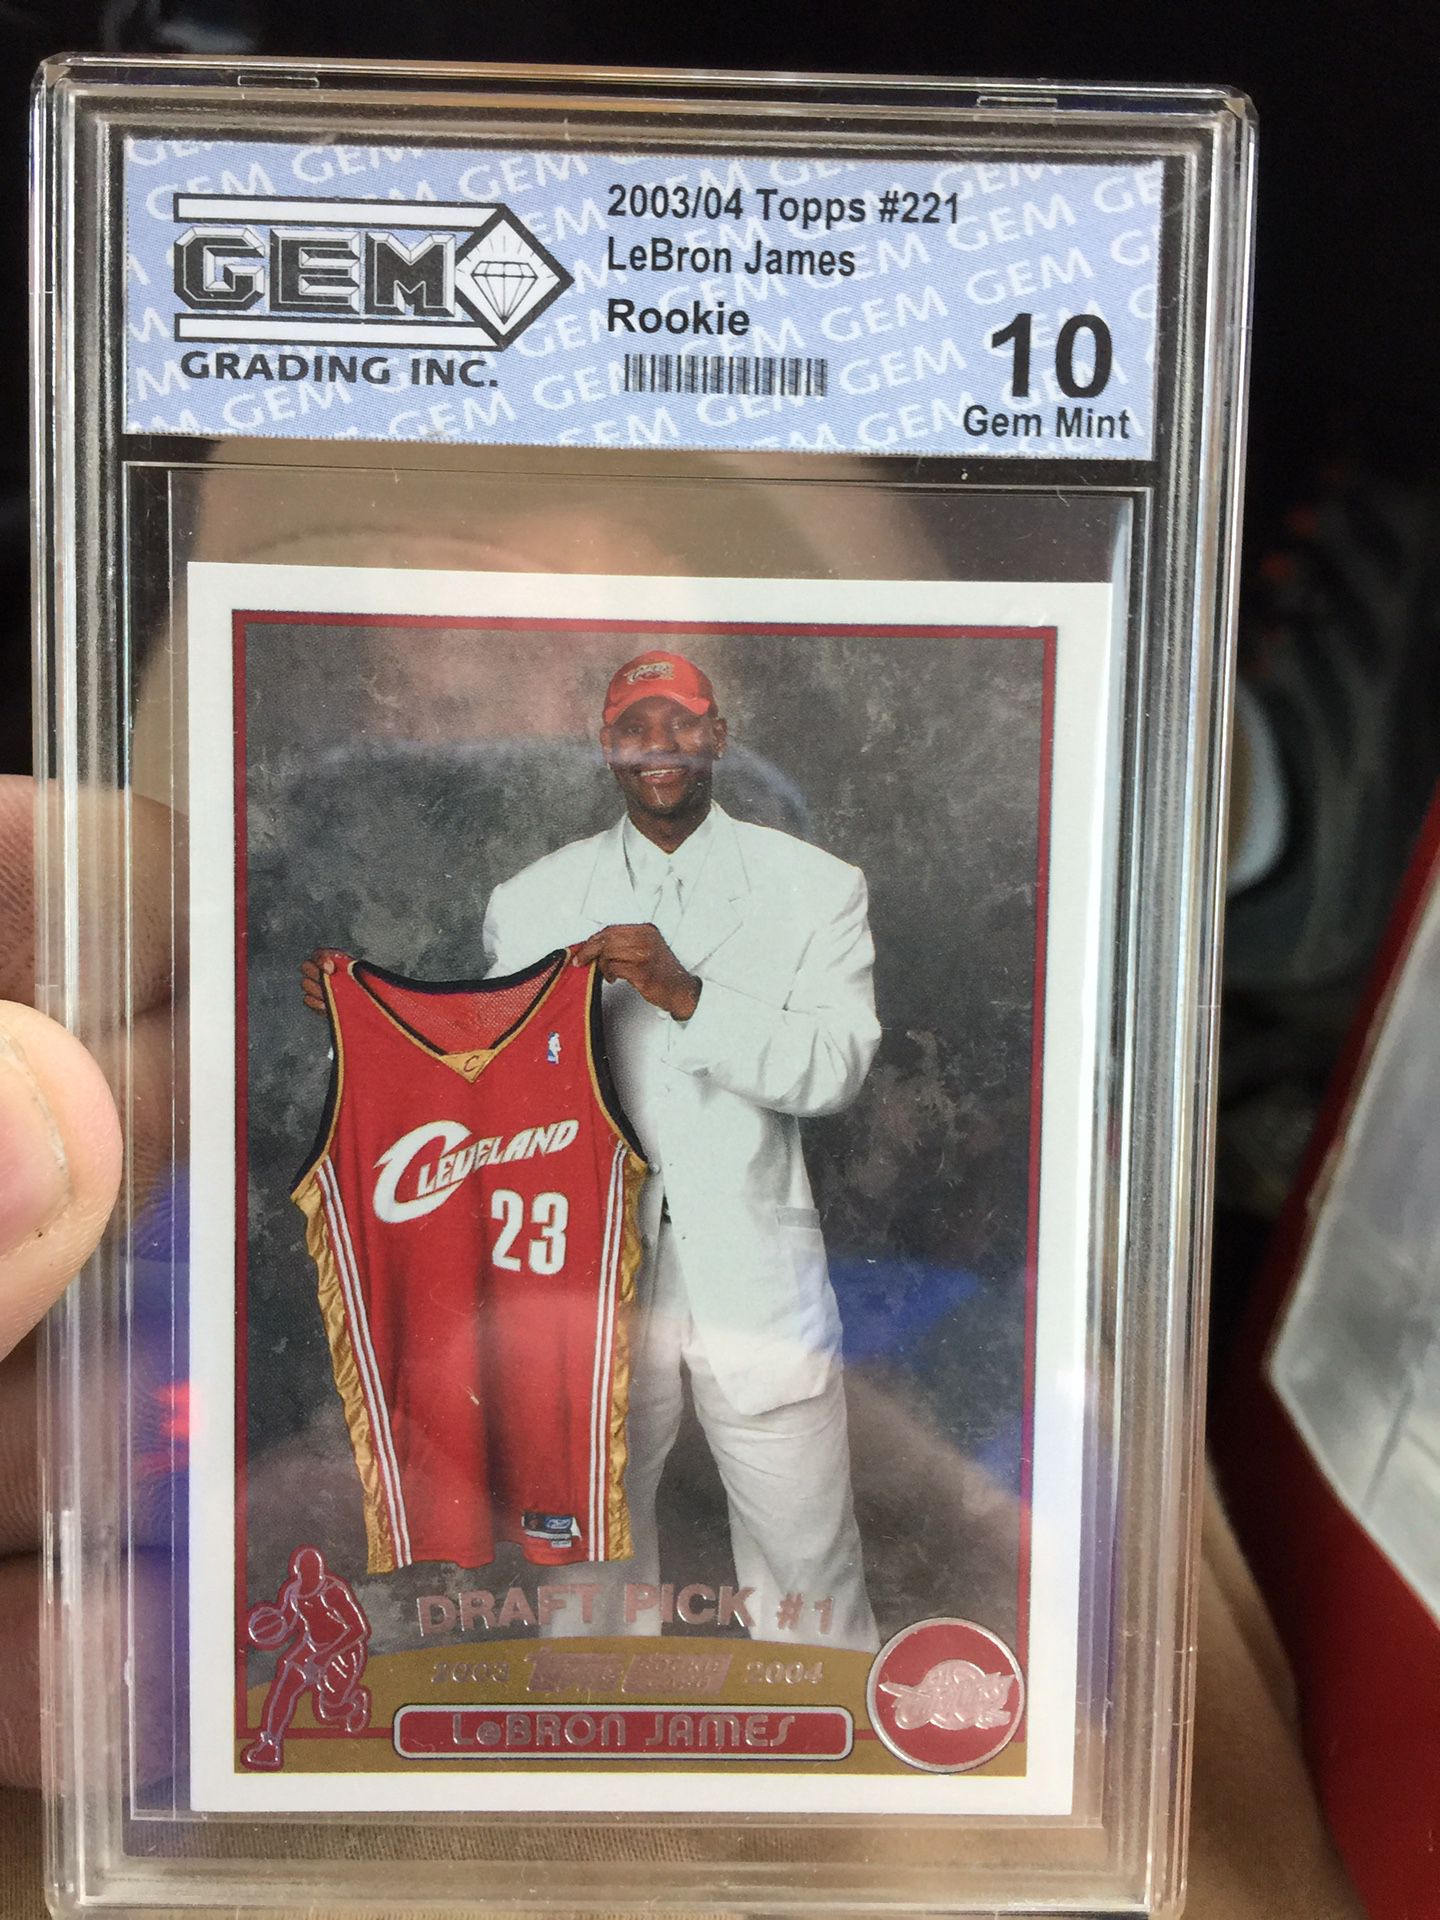 LeBron James draft pick rookie card graded mint condition